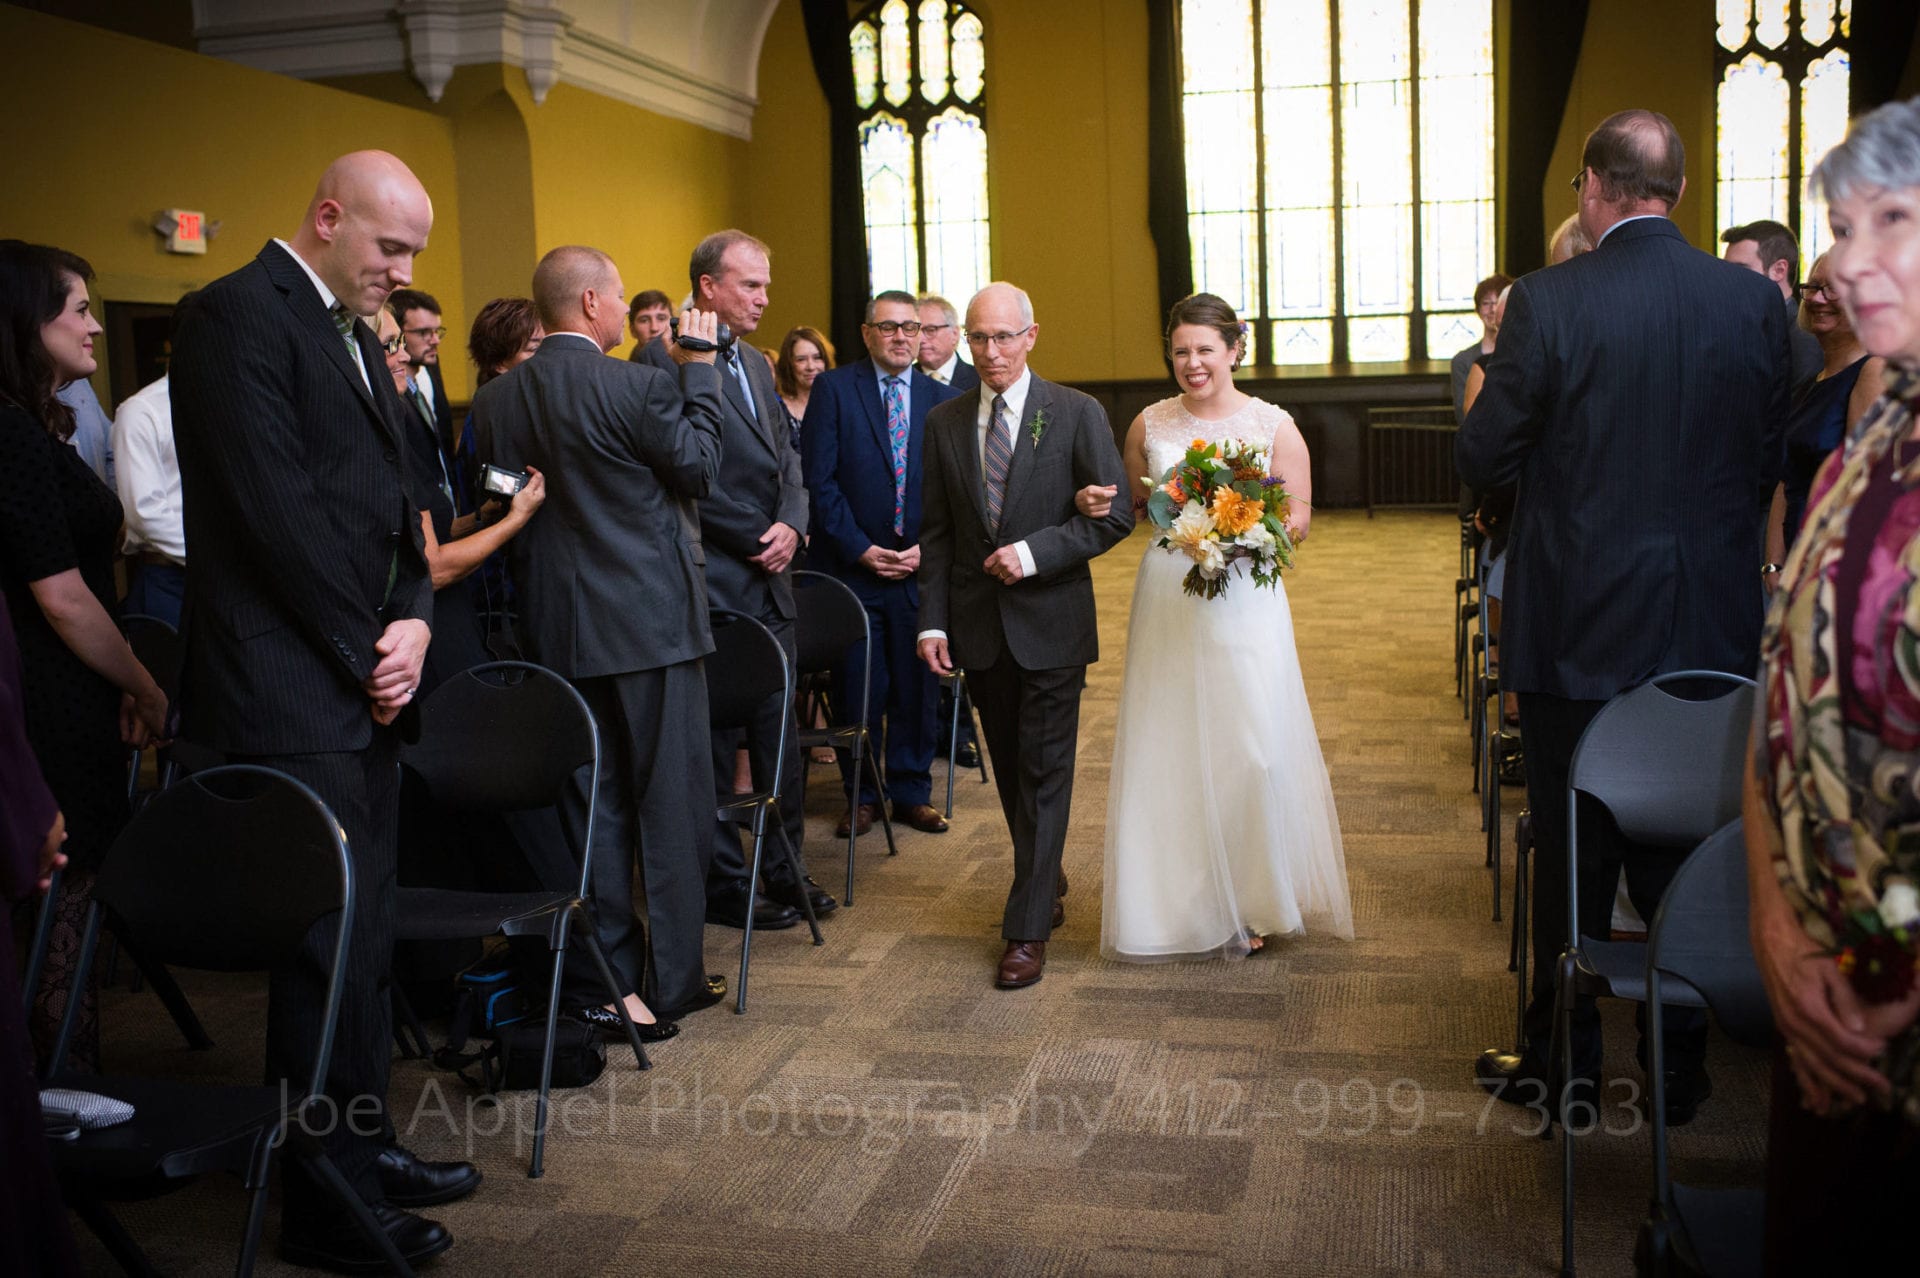 A bride walks down the aisle with her father as guests stand on either side of them. The walls in the room are mustard colored.